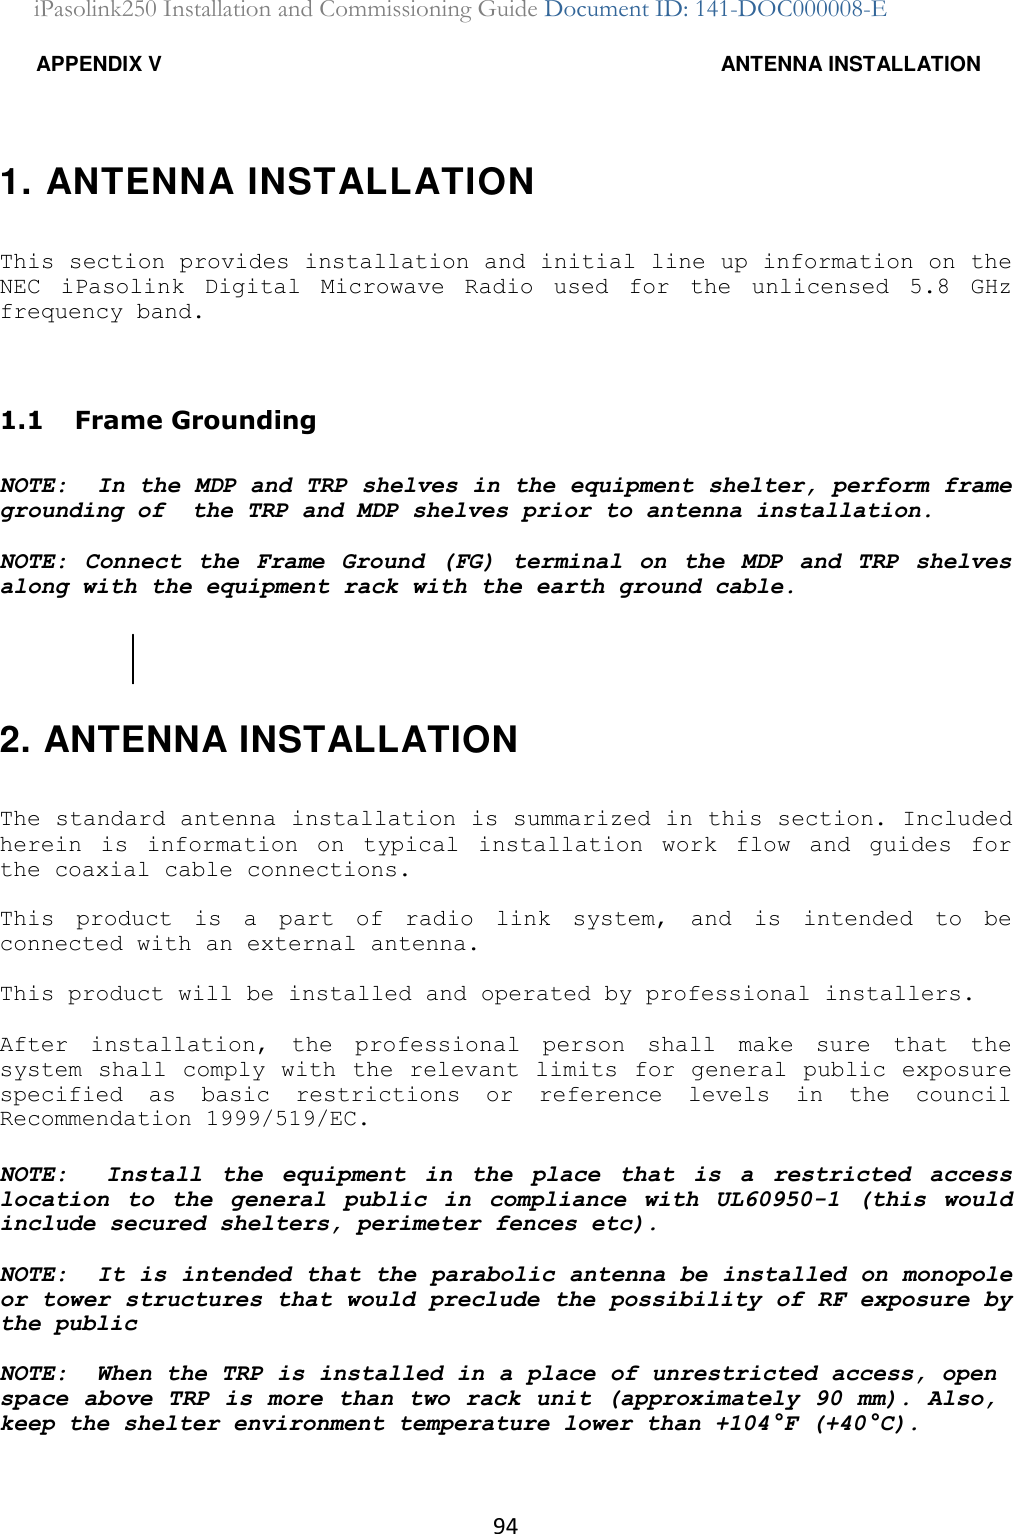 94 iPasolink250 Installation and Commissioning Guide Document ID: 141-DOC000008-E  APPENDIX V  ANTENNA INSTALLATION 1. ANTENNA INSTALLATION This section provides installation and initial line up information on the NEC  iPasolink  Digital  Microwave  Radio  used  for  the  unlicensed  5.8  GHz frequency band. 1.1  Frame Grounding NOTE:  In the MDP and TRP shelves in the equipment shelter, perform frame grounding of  the TRP and MDP shelves prior to antenna installation. NOTE: Connect  the  Frame  Ground  (FG)  terminal  on  the  MDP  and  TRP  shelves along with the equipment rack with the earth ground cable. 2. ANTENNA INSTALLATION The standard antenna installation is summarized in this section. Included herein  is  information  on  typical  installation  work  flow  and  guides  for the coaxial cable connections.  This  product  is  a  part  of  radio  link  system,  and  is  intended  to  be connected with an external antenna. This product will be installed and operated by professional installers. After  installation,  the  professional  person  shall  make  sure  that  the system shall comply with  the  relevant limits for general public exposure specified  as  basic  restrictions  or  reference  levels  in  the  council Recommendation 1999/519/EC. NOTE:    Install  the  equipment  in  the  place  that  is  a  restricted  access location  to  the  general  public  in  compliance  with  UL60950-1  (this  would include secured shelters, perimeter fences etc).    NOTE:  It is intended that the parabolic antenna be installed on monopole or tower structures that would preclude the possibility of RF exposure by the public NOTE:  When the TRP is installed in a place of unrestricted access, open space above TRP is more than two rack unit (approximately 90 mm). Also, keep the shelter environment temperature lower than +104°F (+40°C). 